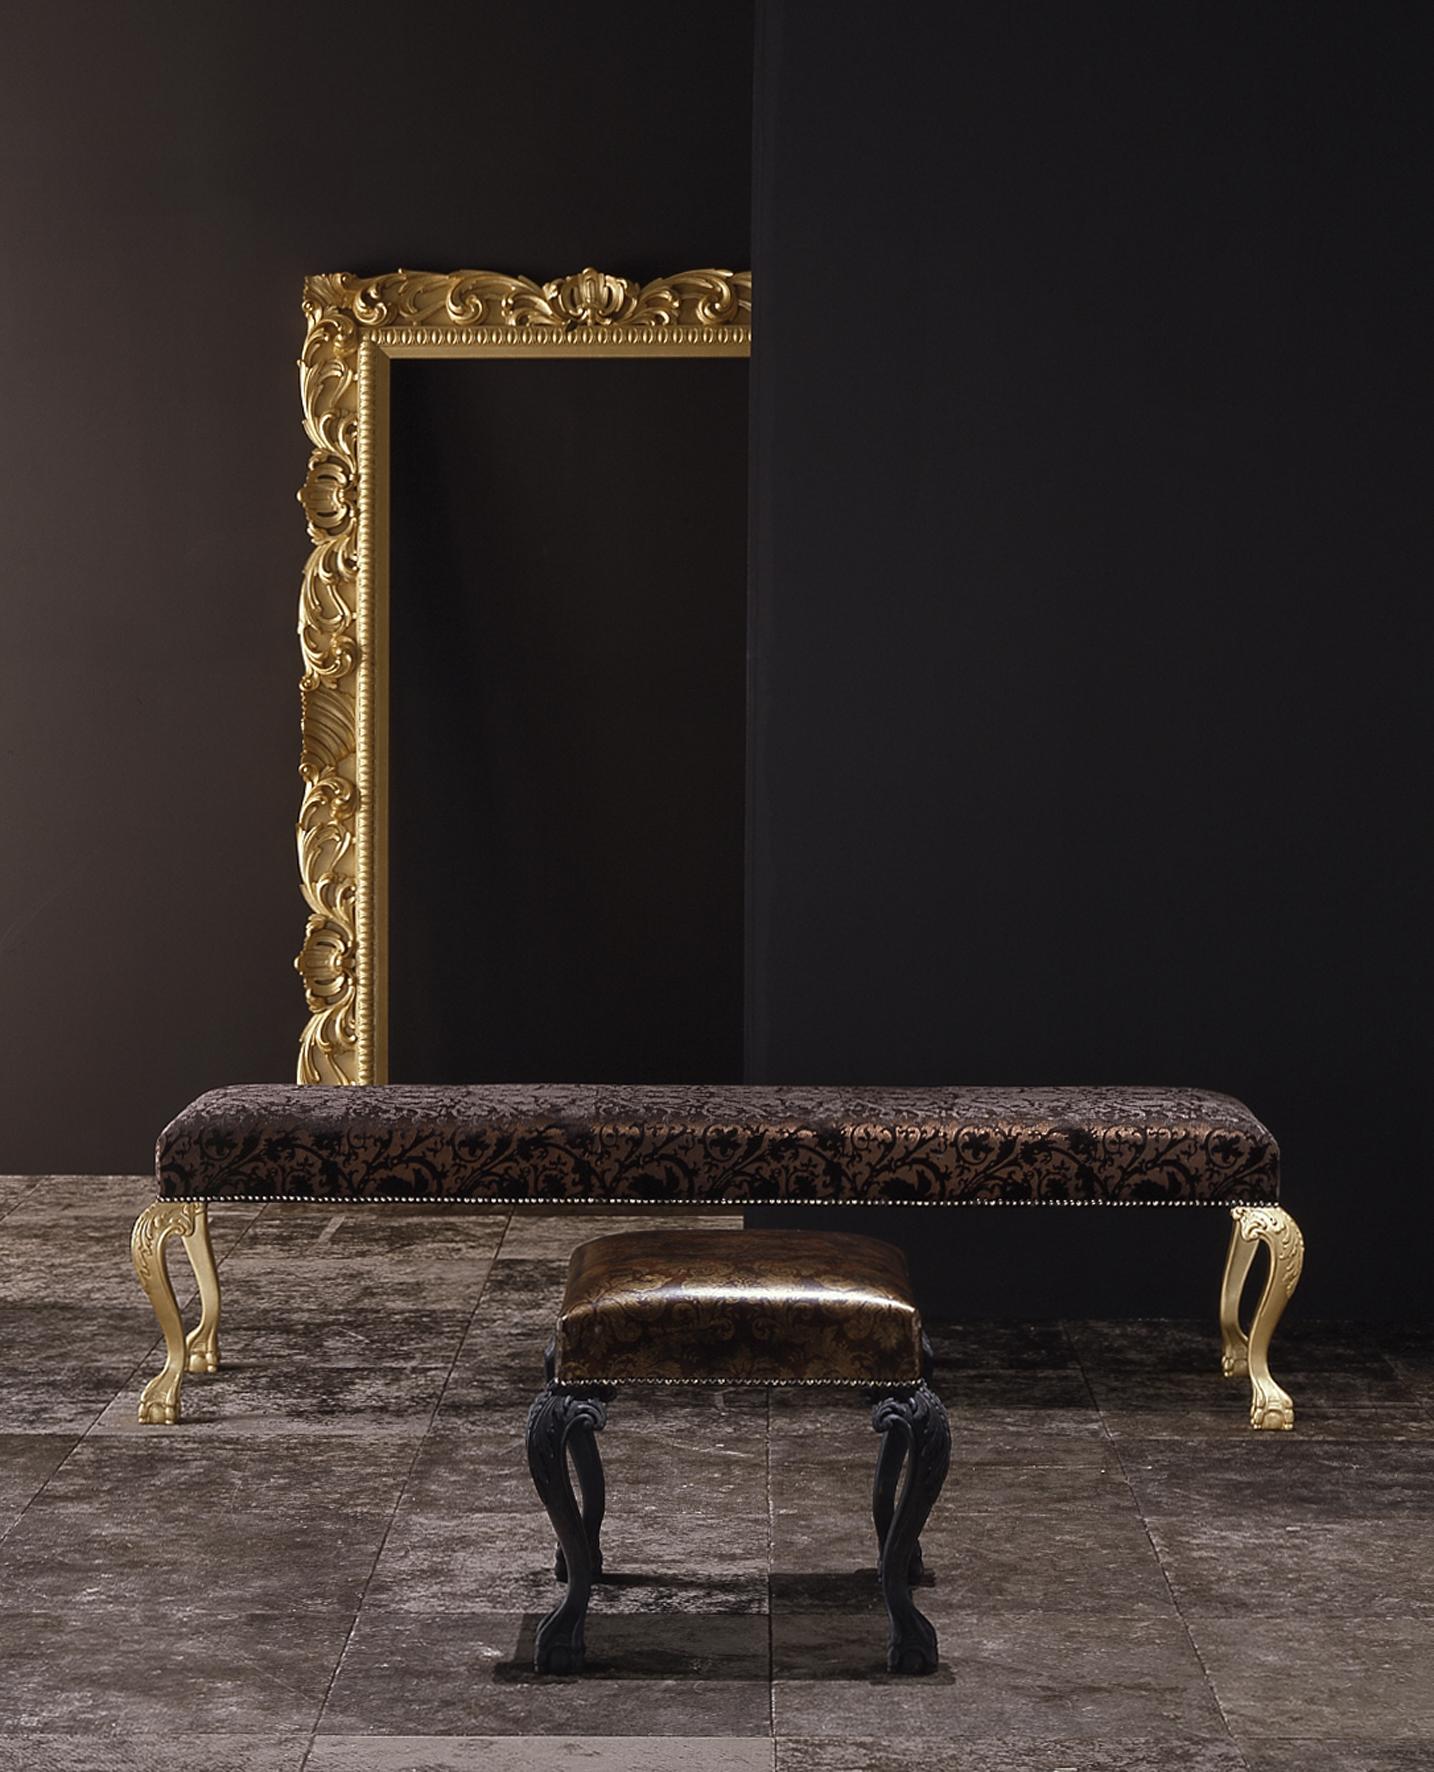 
Behold the epitome of timeless elegance—the Baroque Mirror, a masterpiece of craftsmanship that transcends eras. Each curve and detail of its wooden frame is meticulously hand-carved, infusing the mirror with a sense of artistry that speaks to the